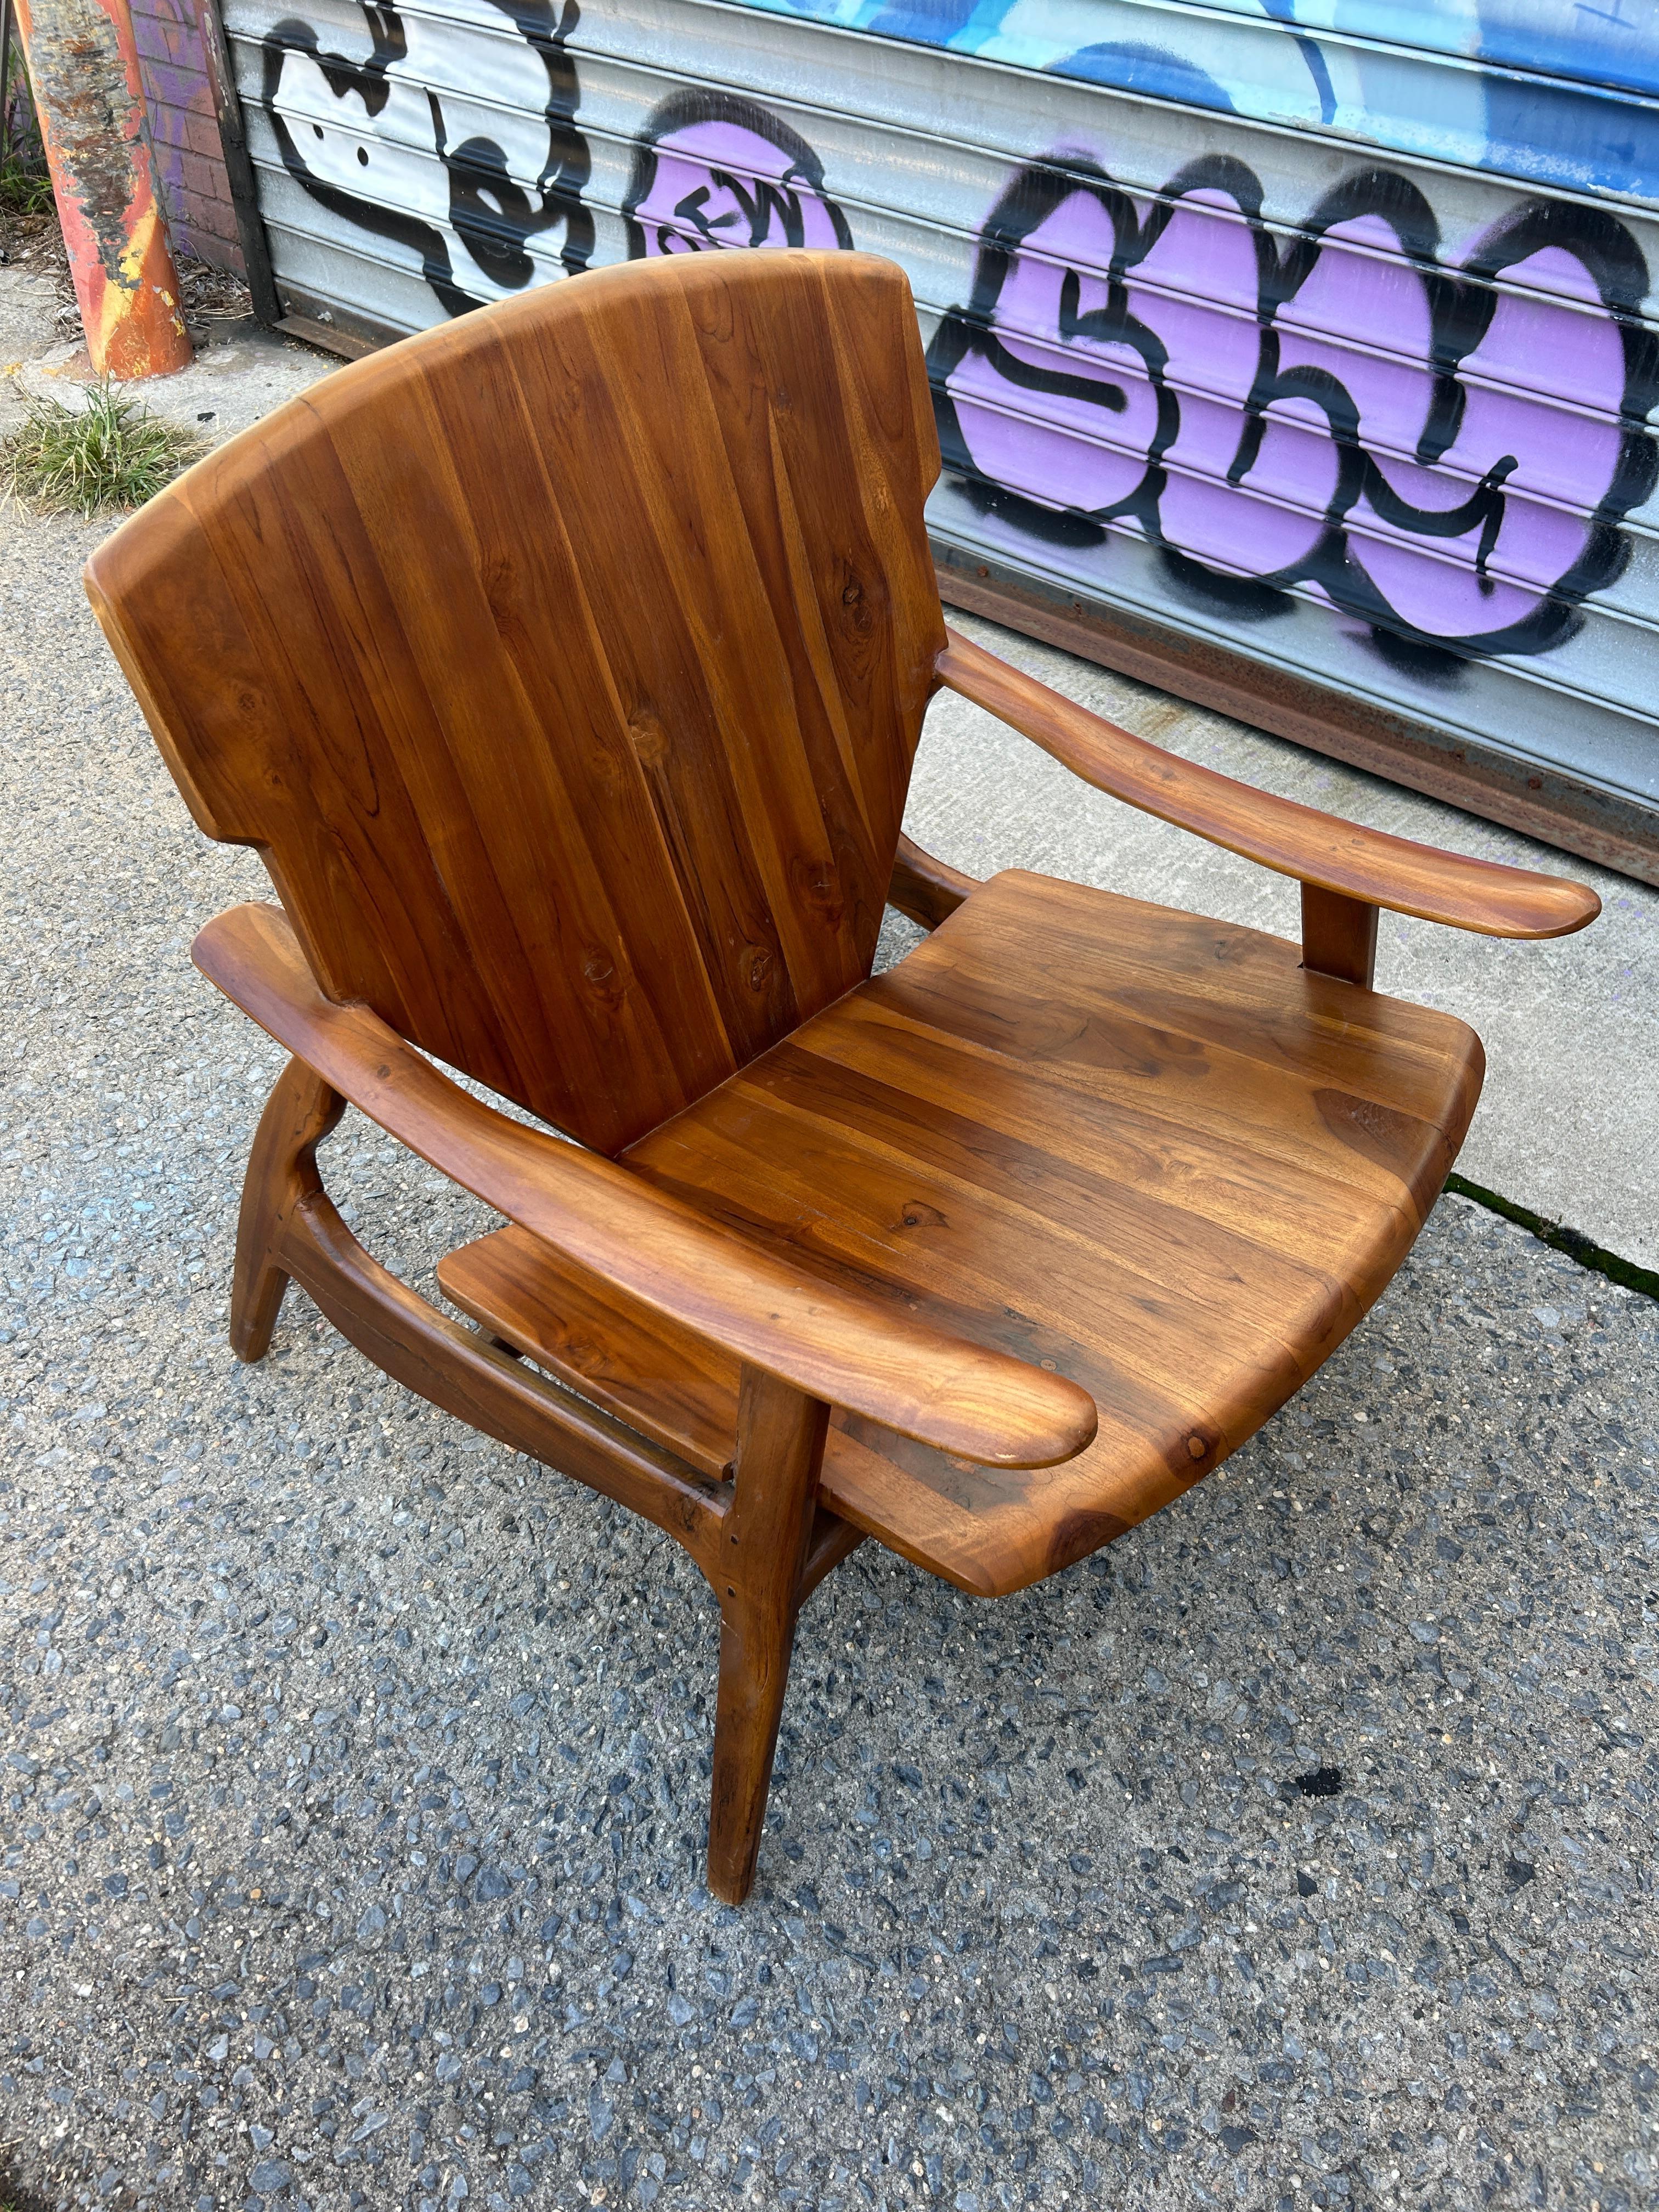 Mid century Brazilian Modern DIZ chair attributed to Sergio Rodrigues hardwood Lounge Chair - All solid exotic hardwood. No labels a modern production of the actual DIZ chair designed by Sergio Rodrigues. Made In Brazil. Located in Brooklyn NYC.
